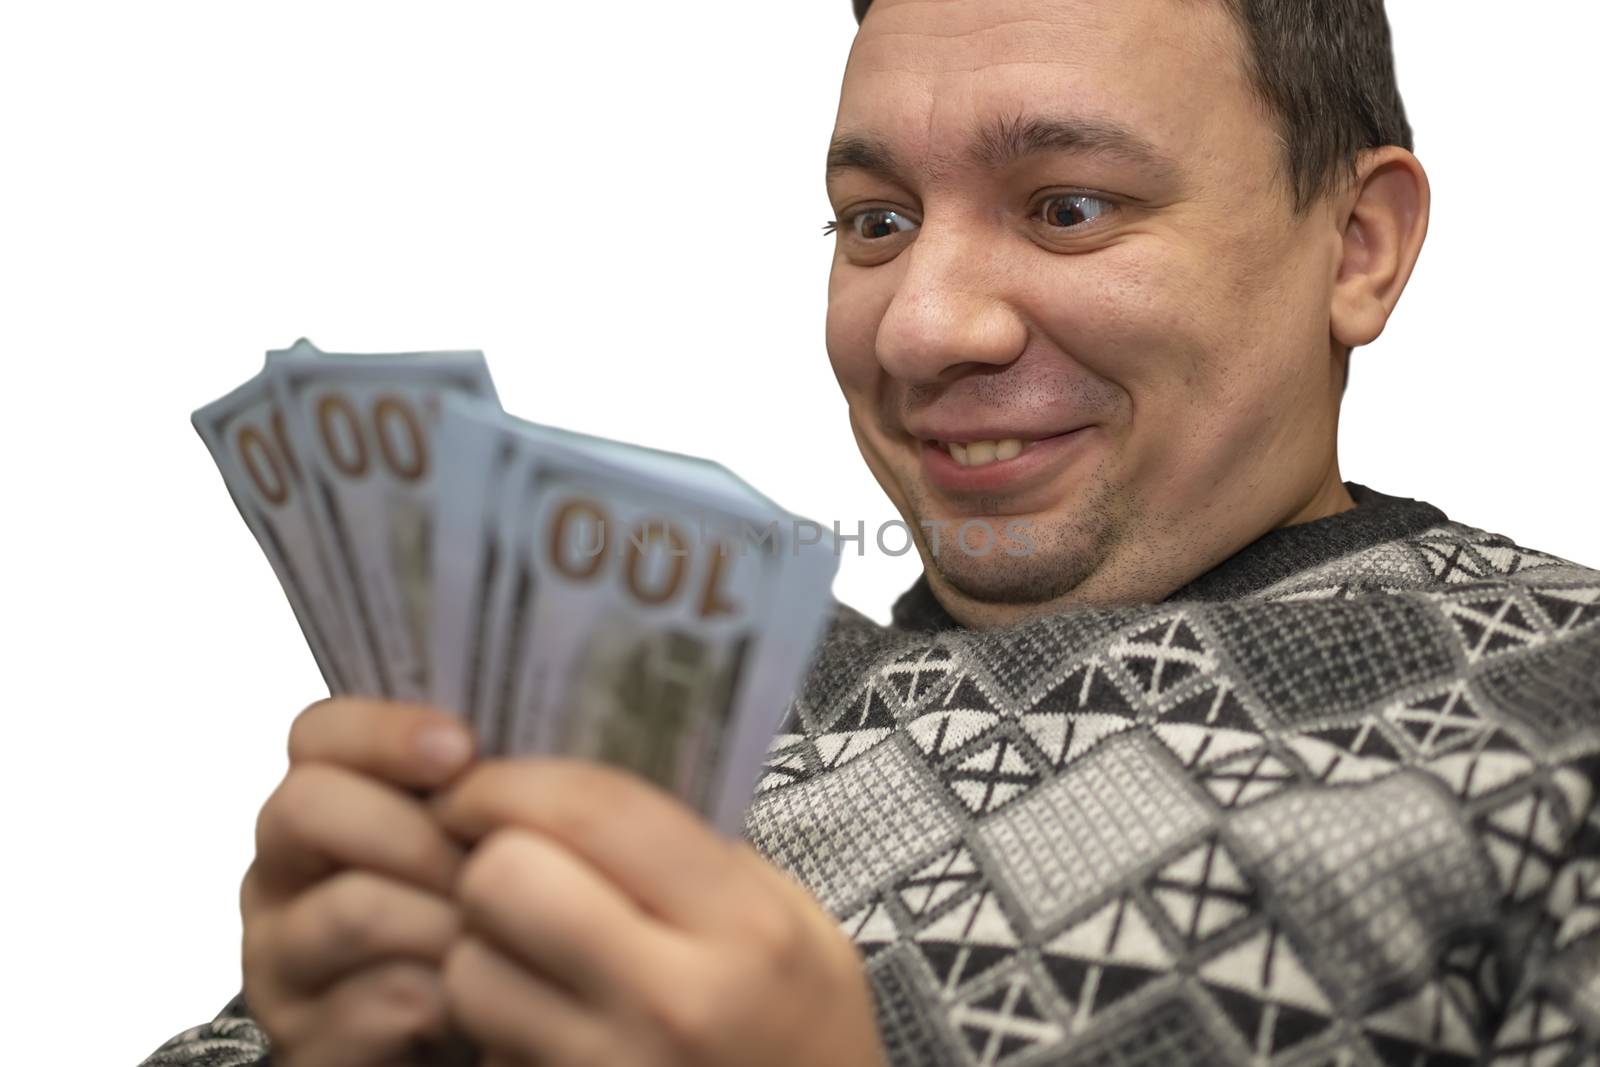 the happy, contented, abnormal, crazy face of a man who holds money and looks at it with a smile and pleasure